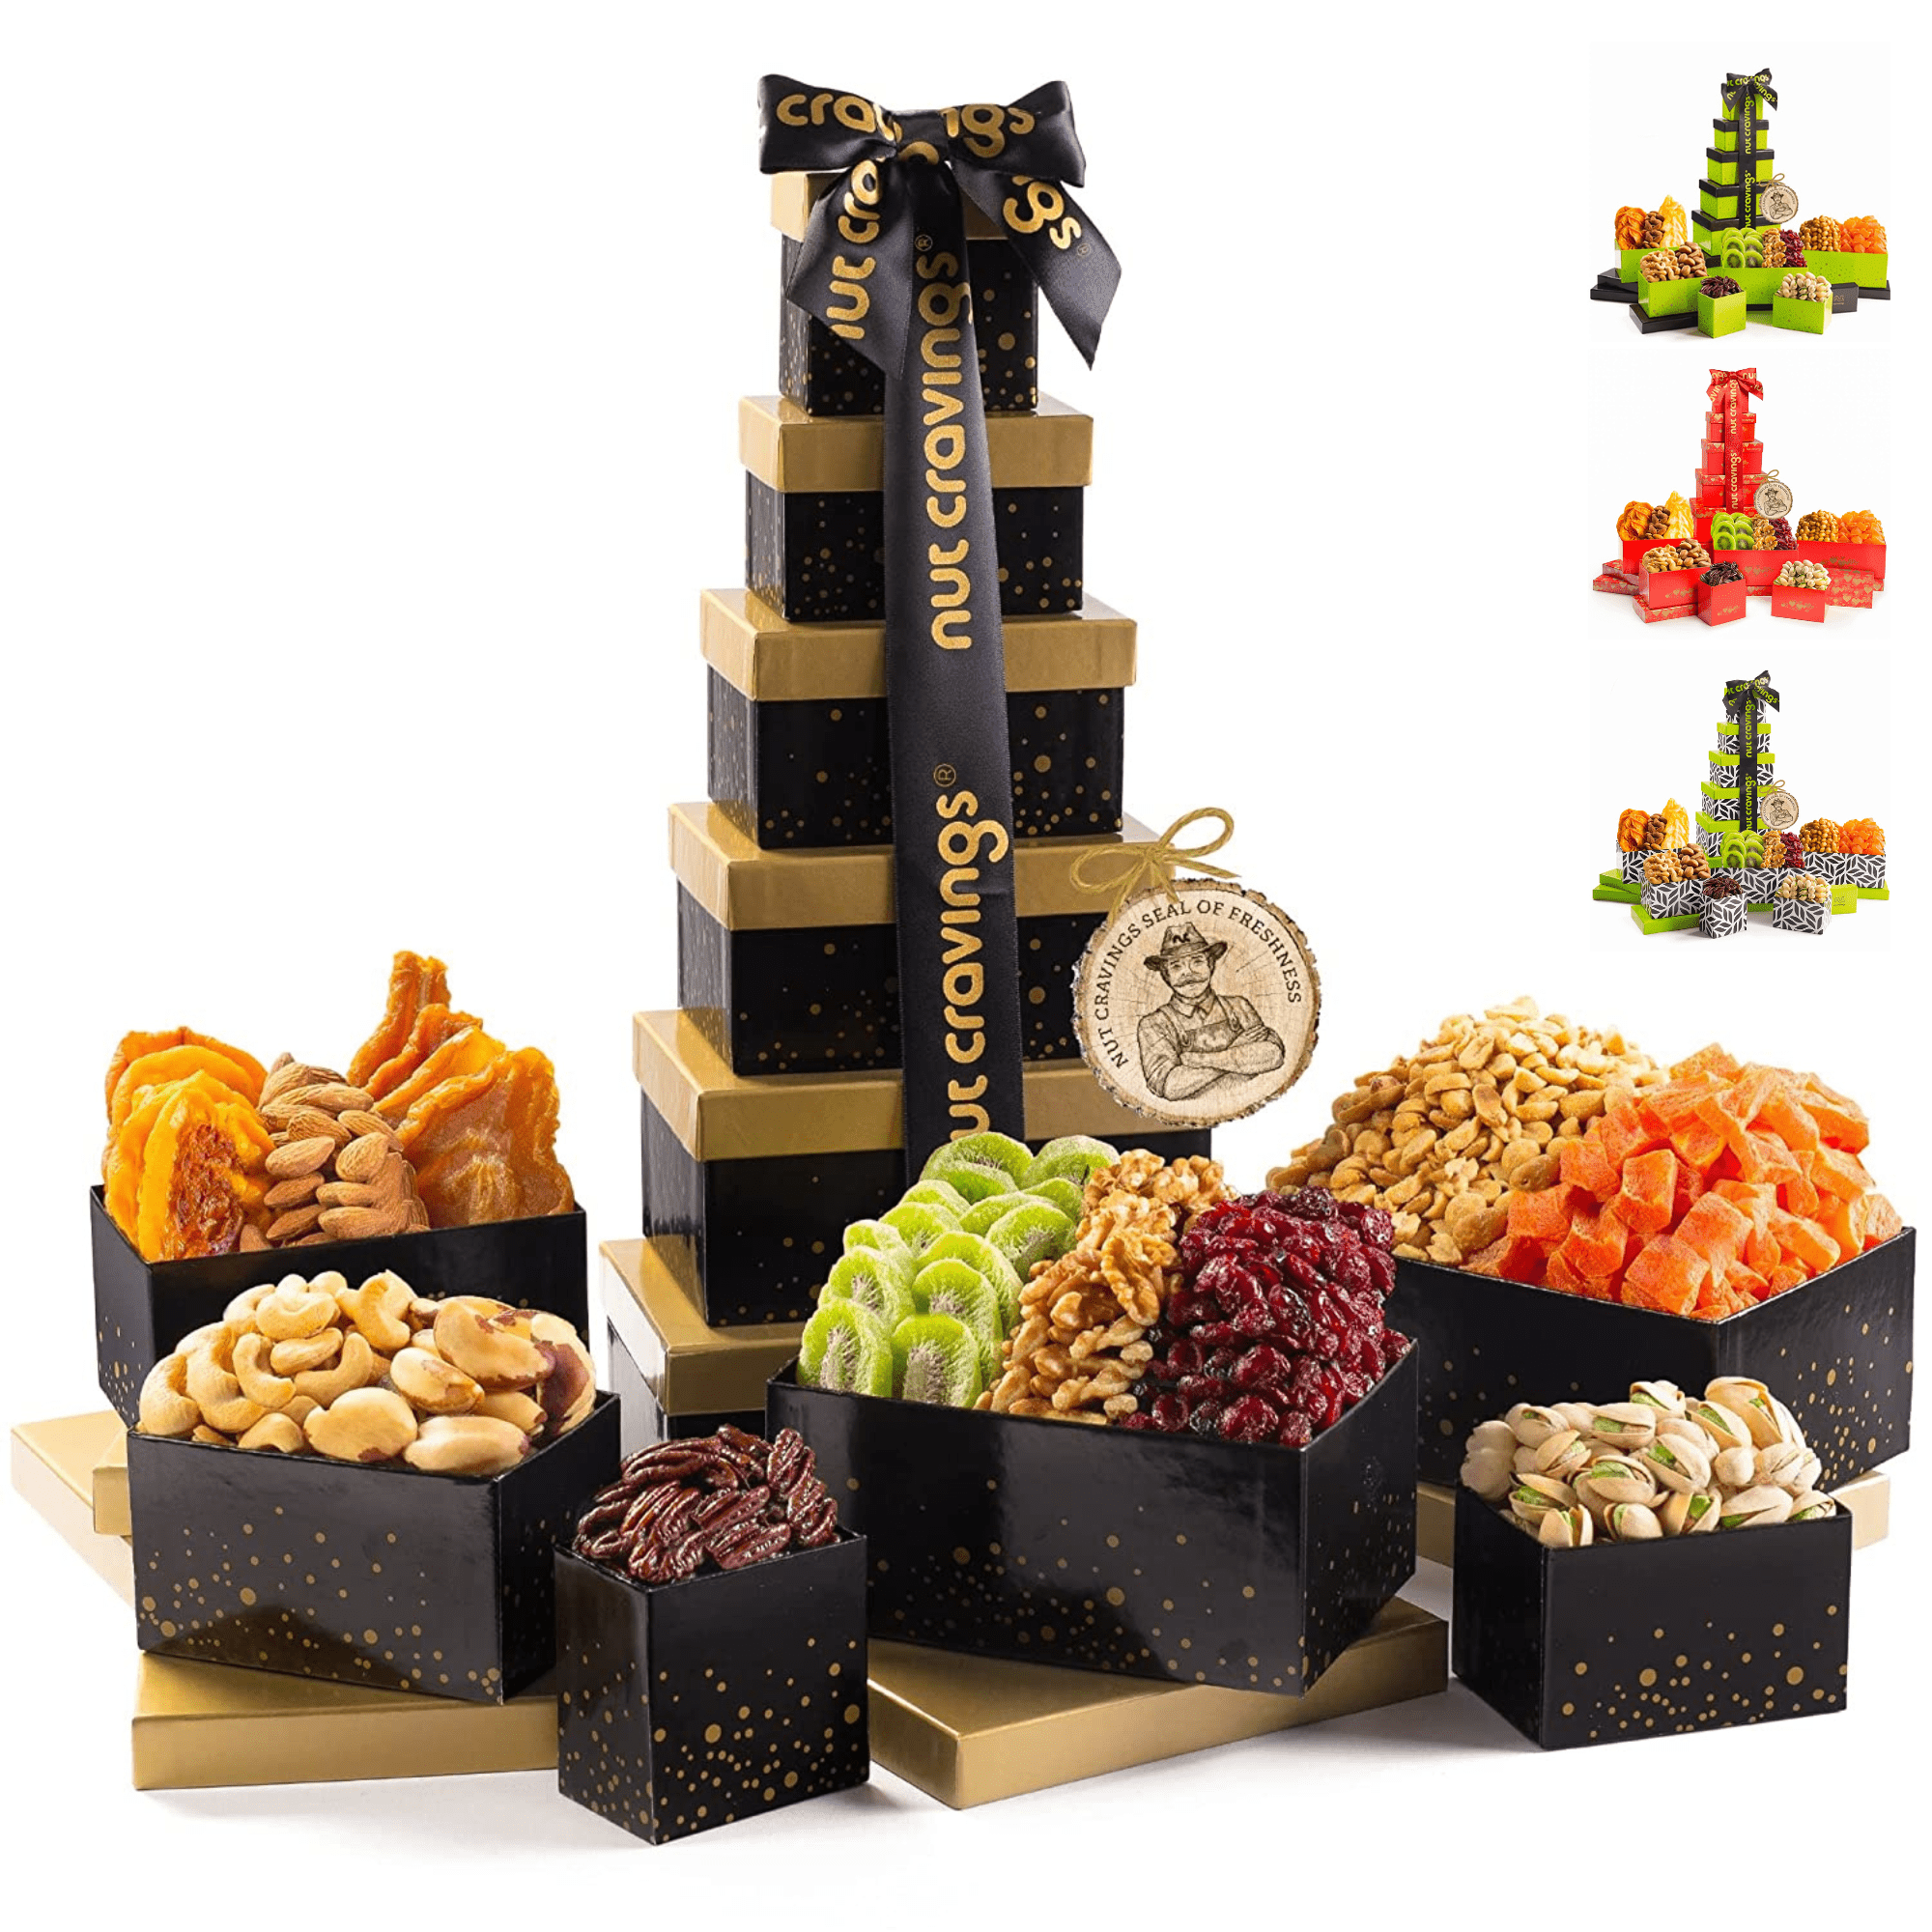 Gourmet Food Gift Basket Tower Snack Gifts for Women, Men, Families,  College – Delivery for Holidays, Appreciation, Thank You, Congratulations